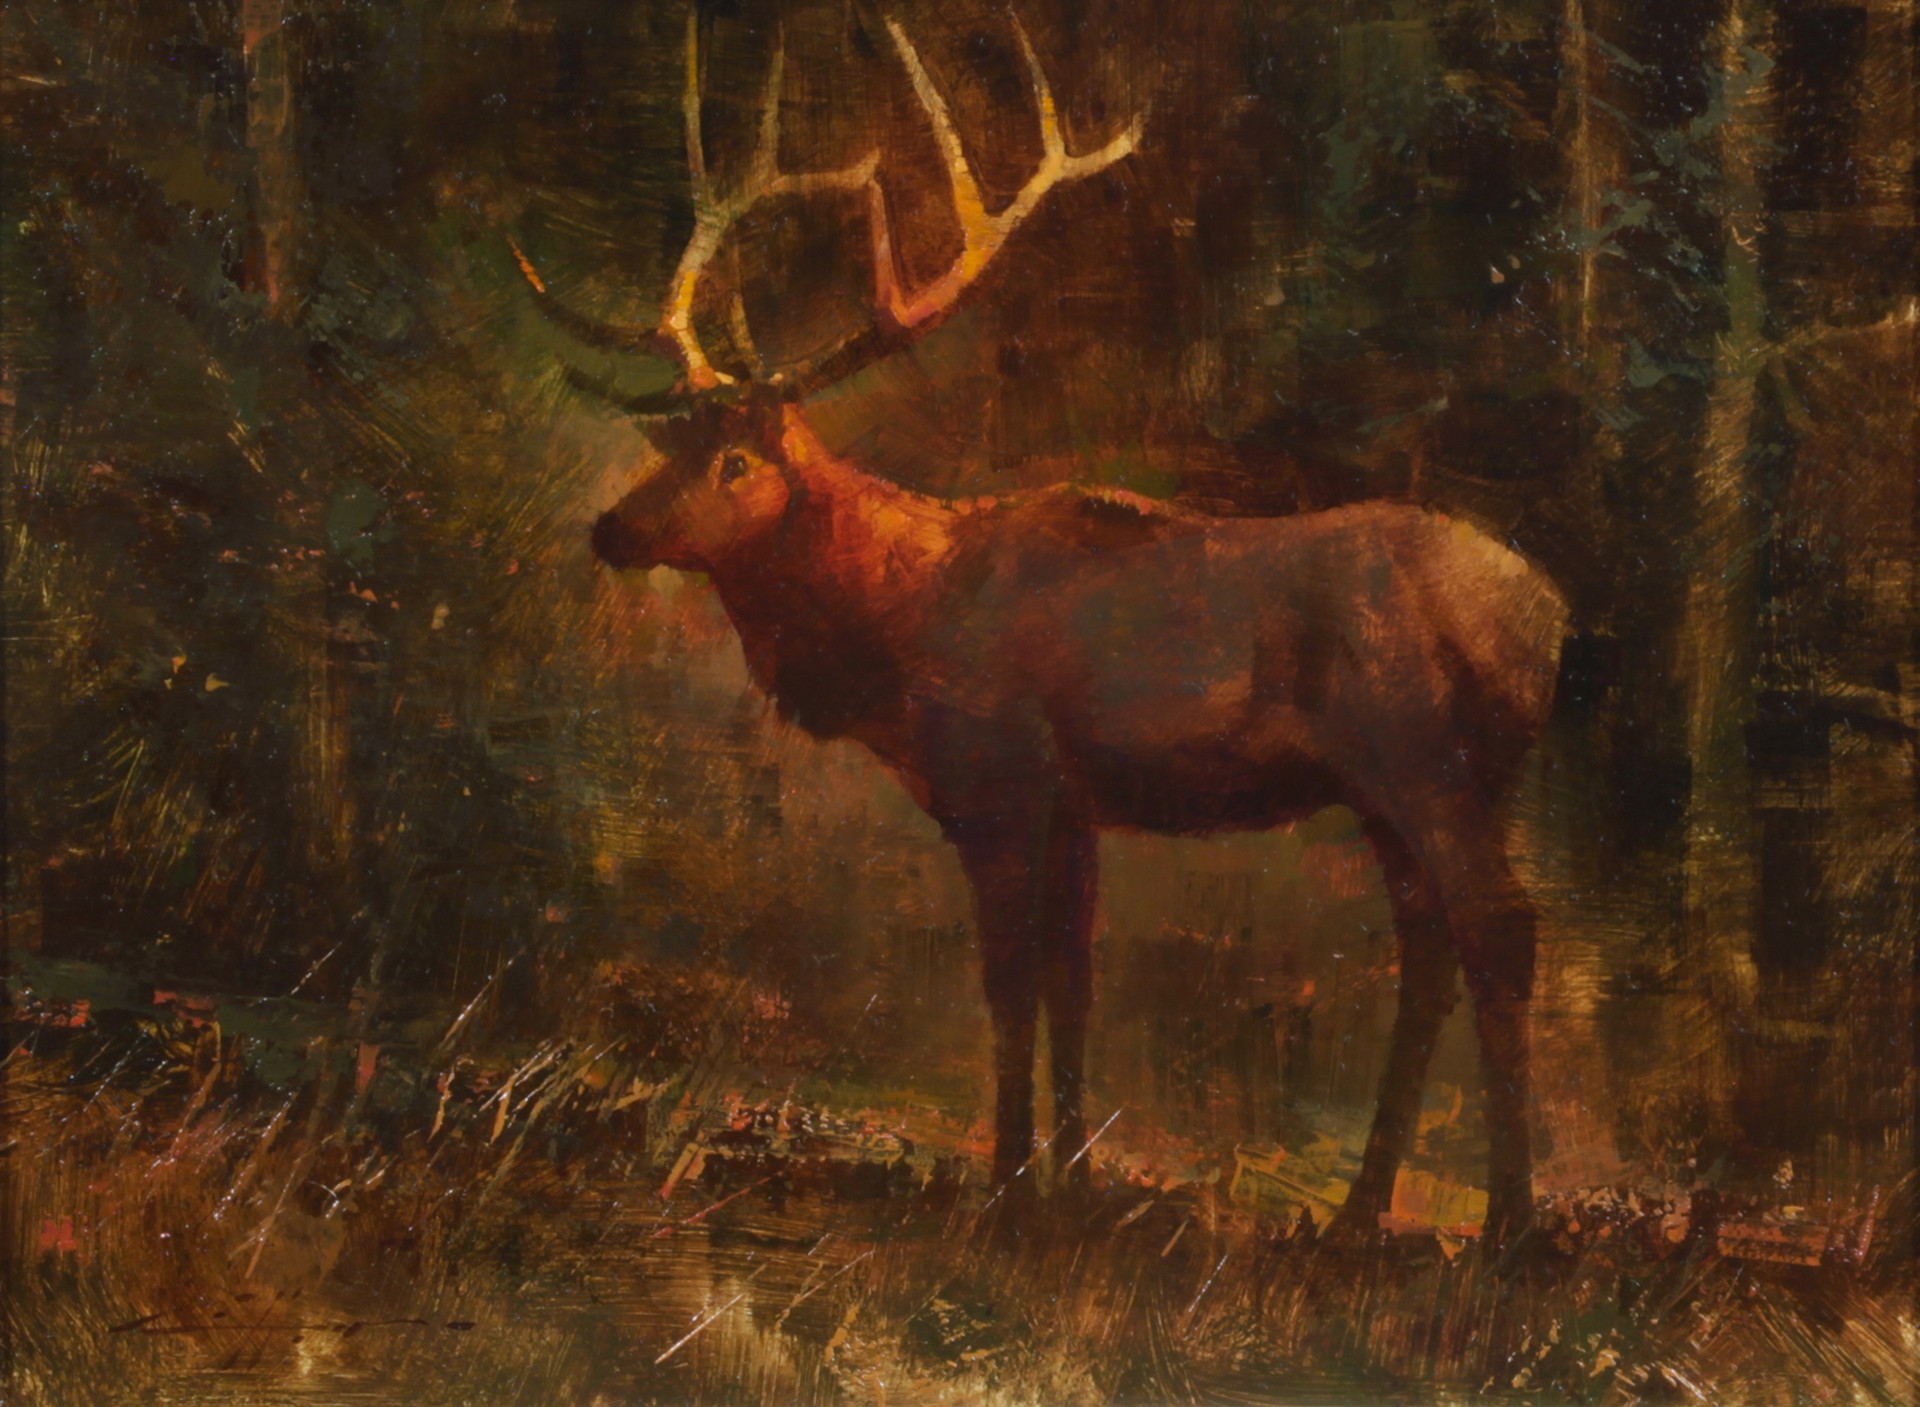 Prince of the Forest by Brent Cotton